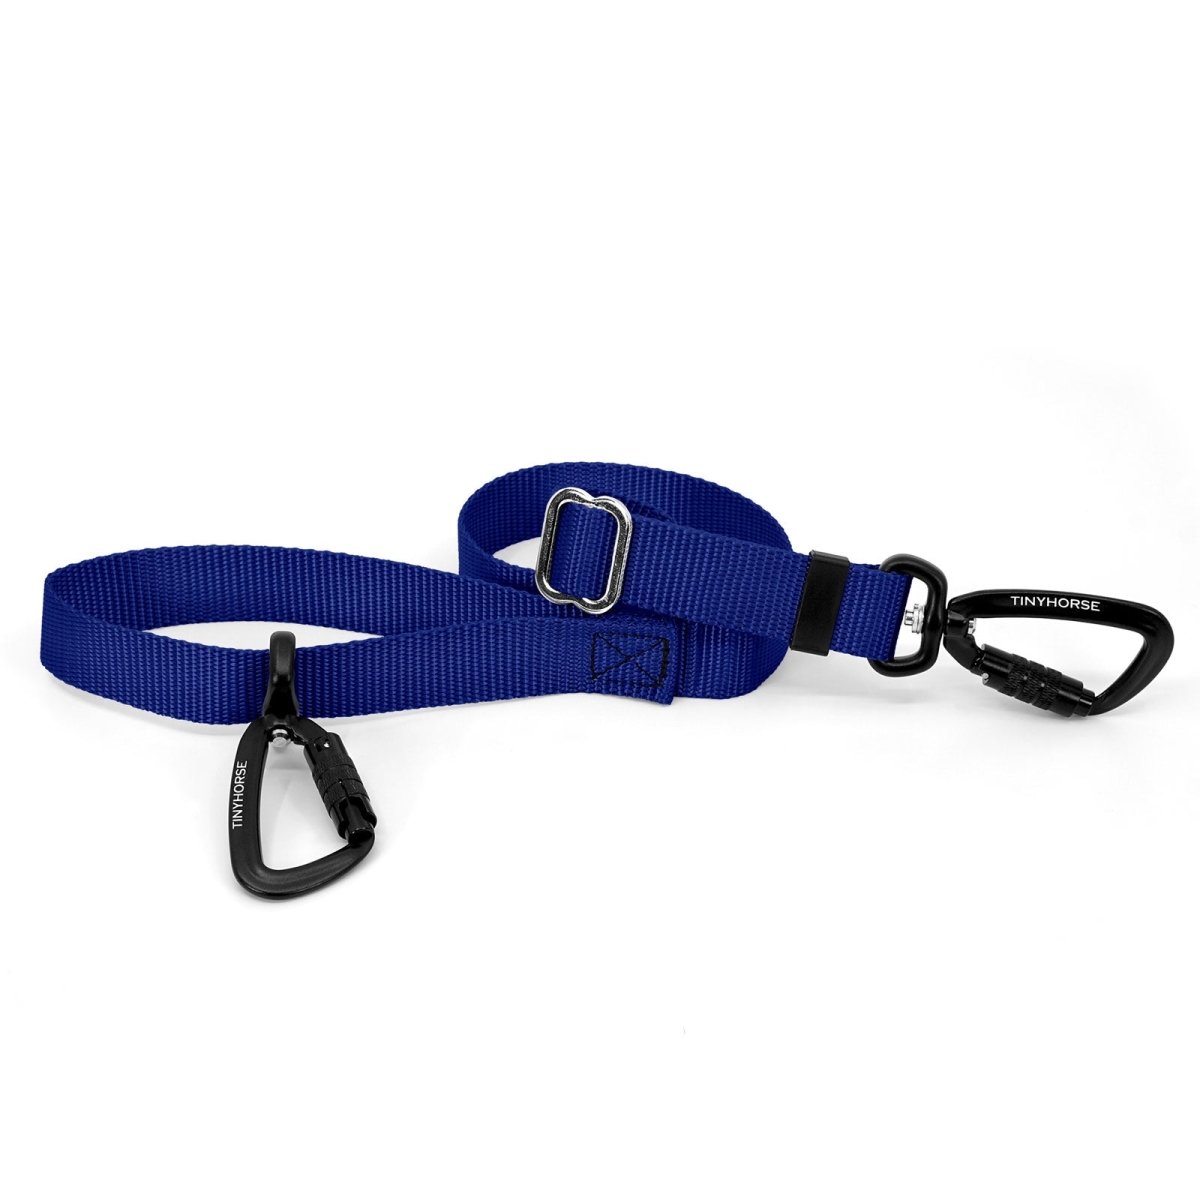 A royal blue-coloured Lead-All Lite with an adjustable nylon webbing leash and 2 auto-locking carabiners